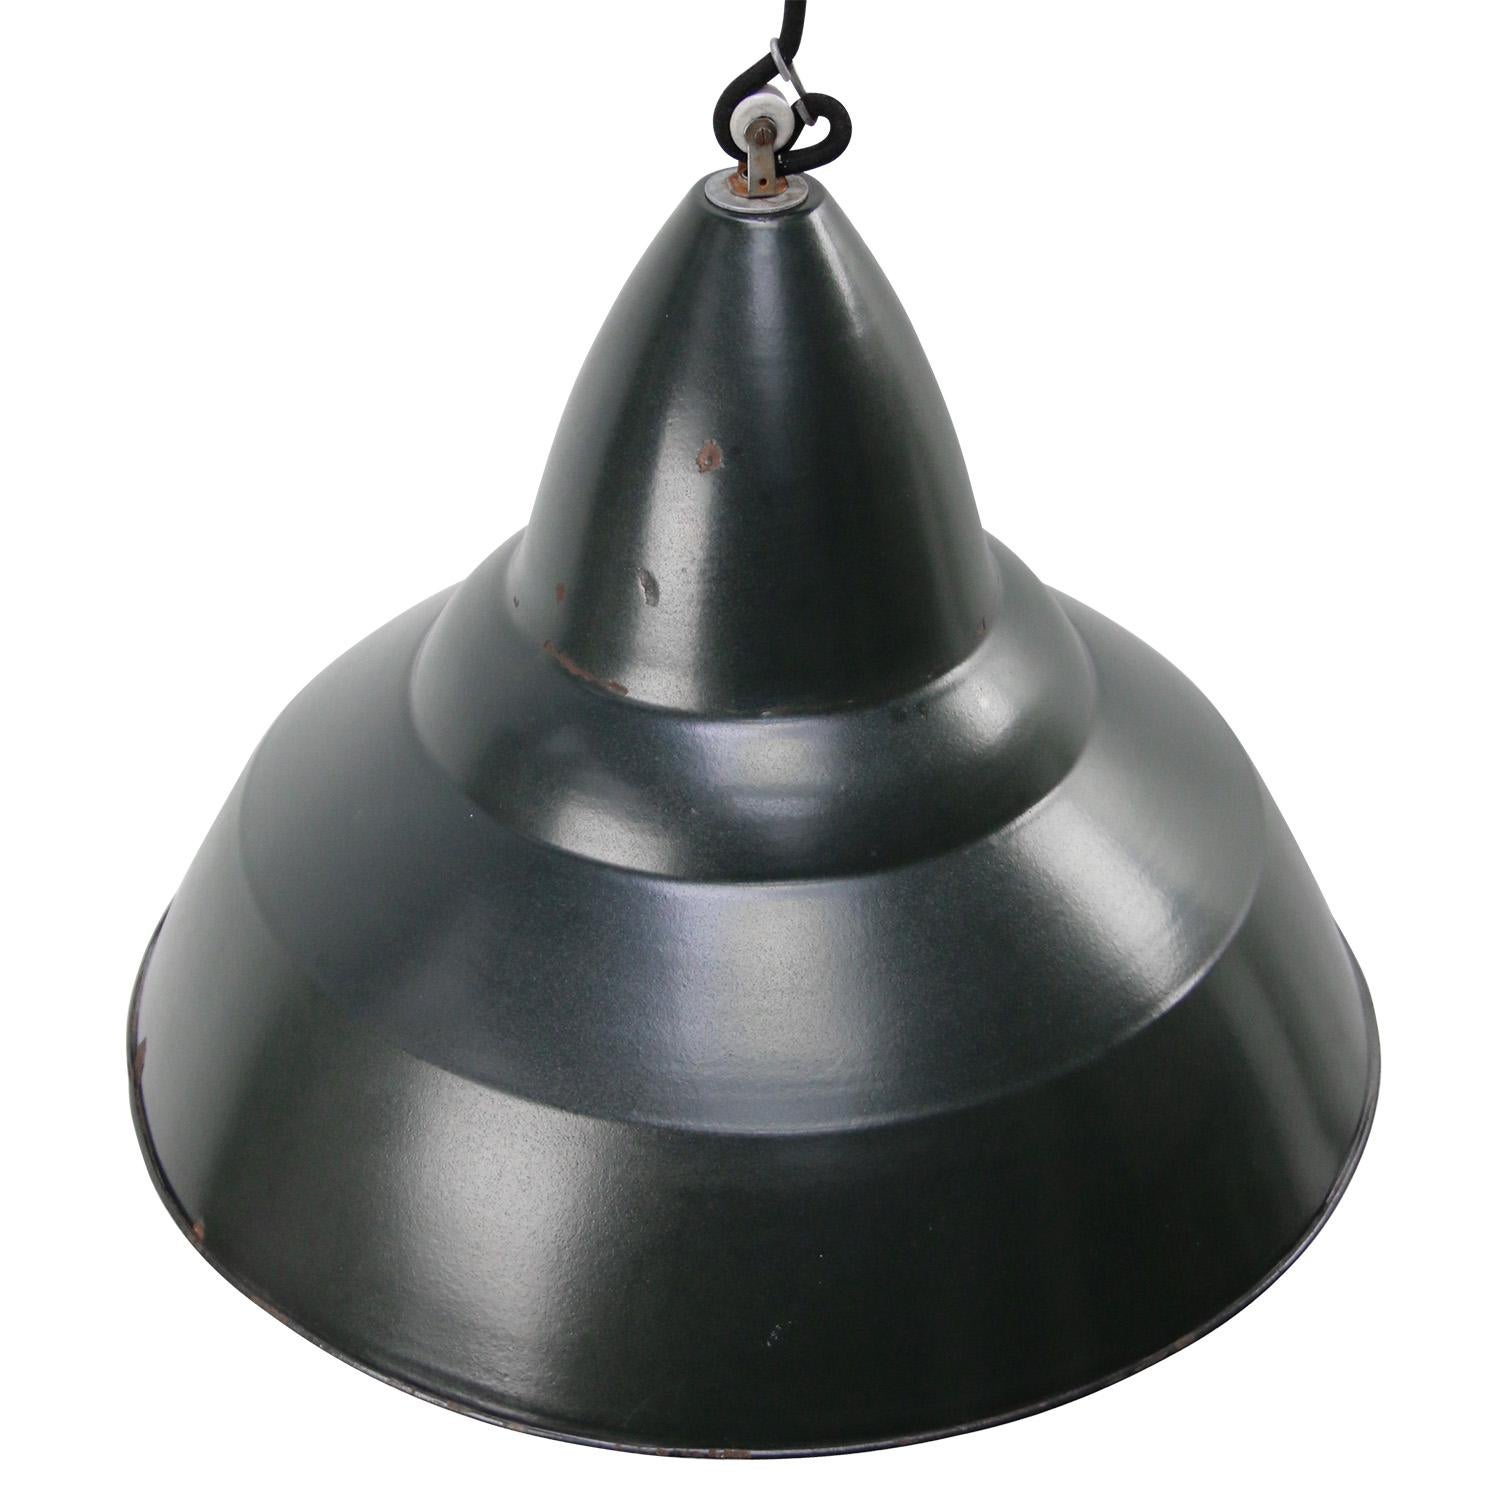 Belgian Industrial pendant lamps.
Green enamel, white inside

Weight: 1.90 kg / 4.2 lb

Priced per individual item. All lamps have been made suitable by international standards for incandescent light bulbs, energy-efficient and LED bulbs.